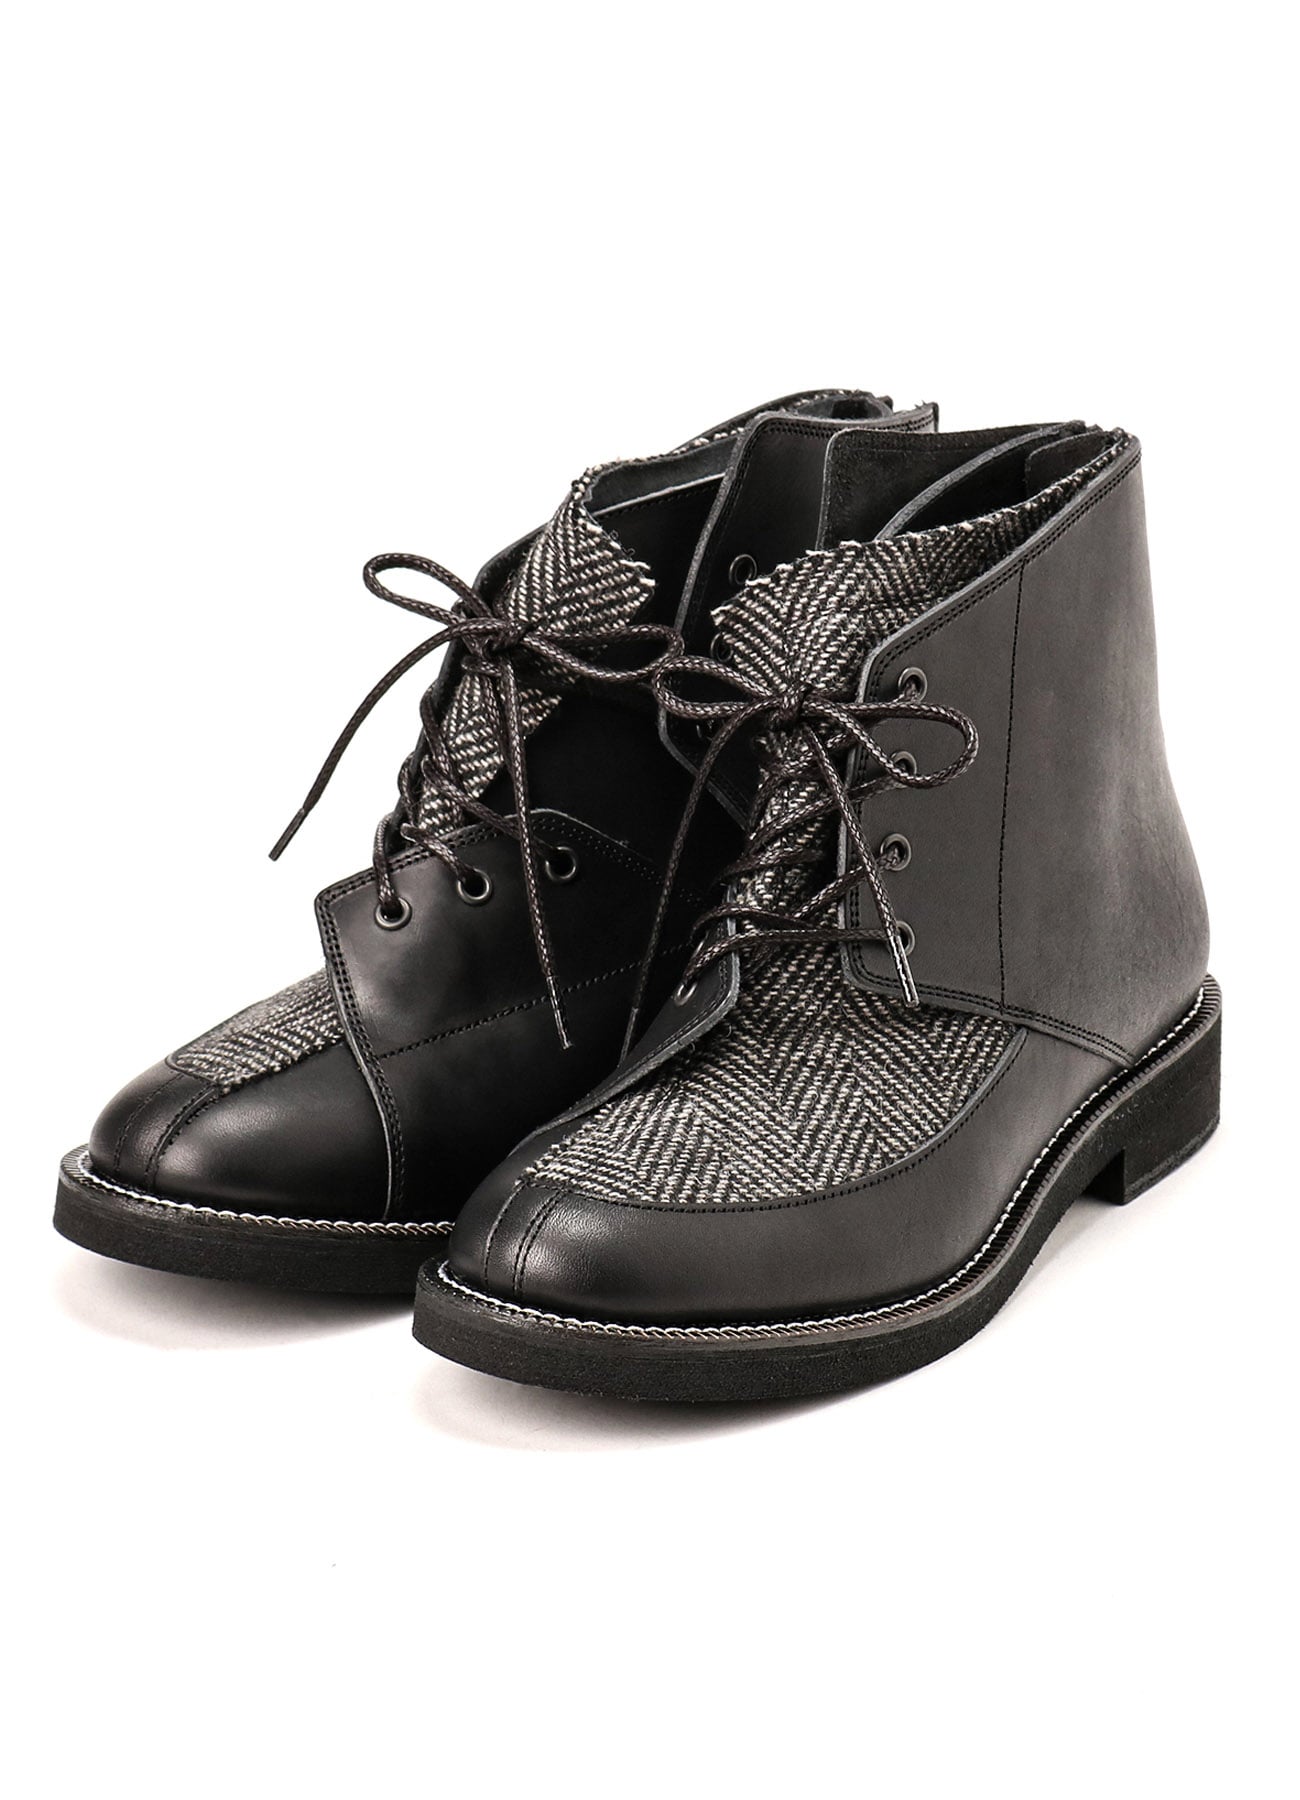 SMOOTH LEATHER/WOOL HERRINGBONE COMBI LACE-UP BOOTS